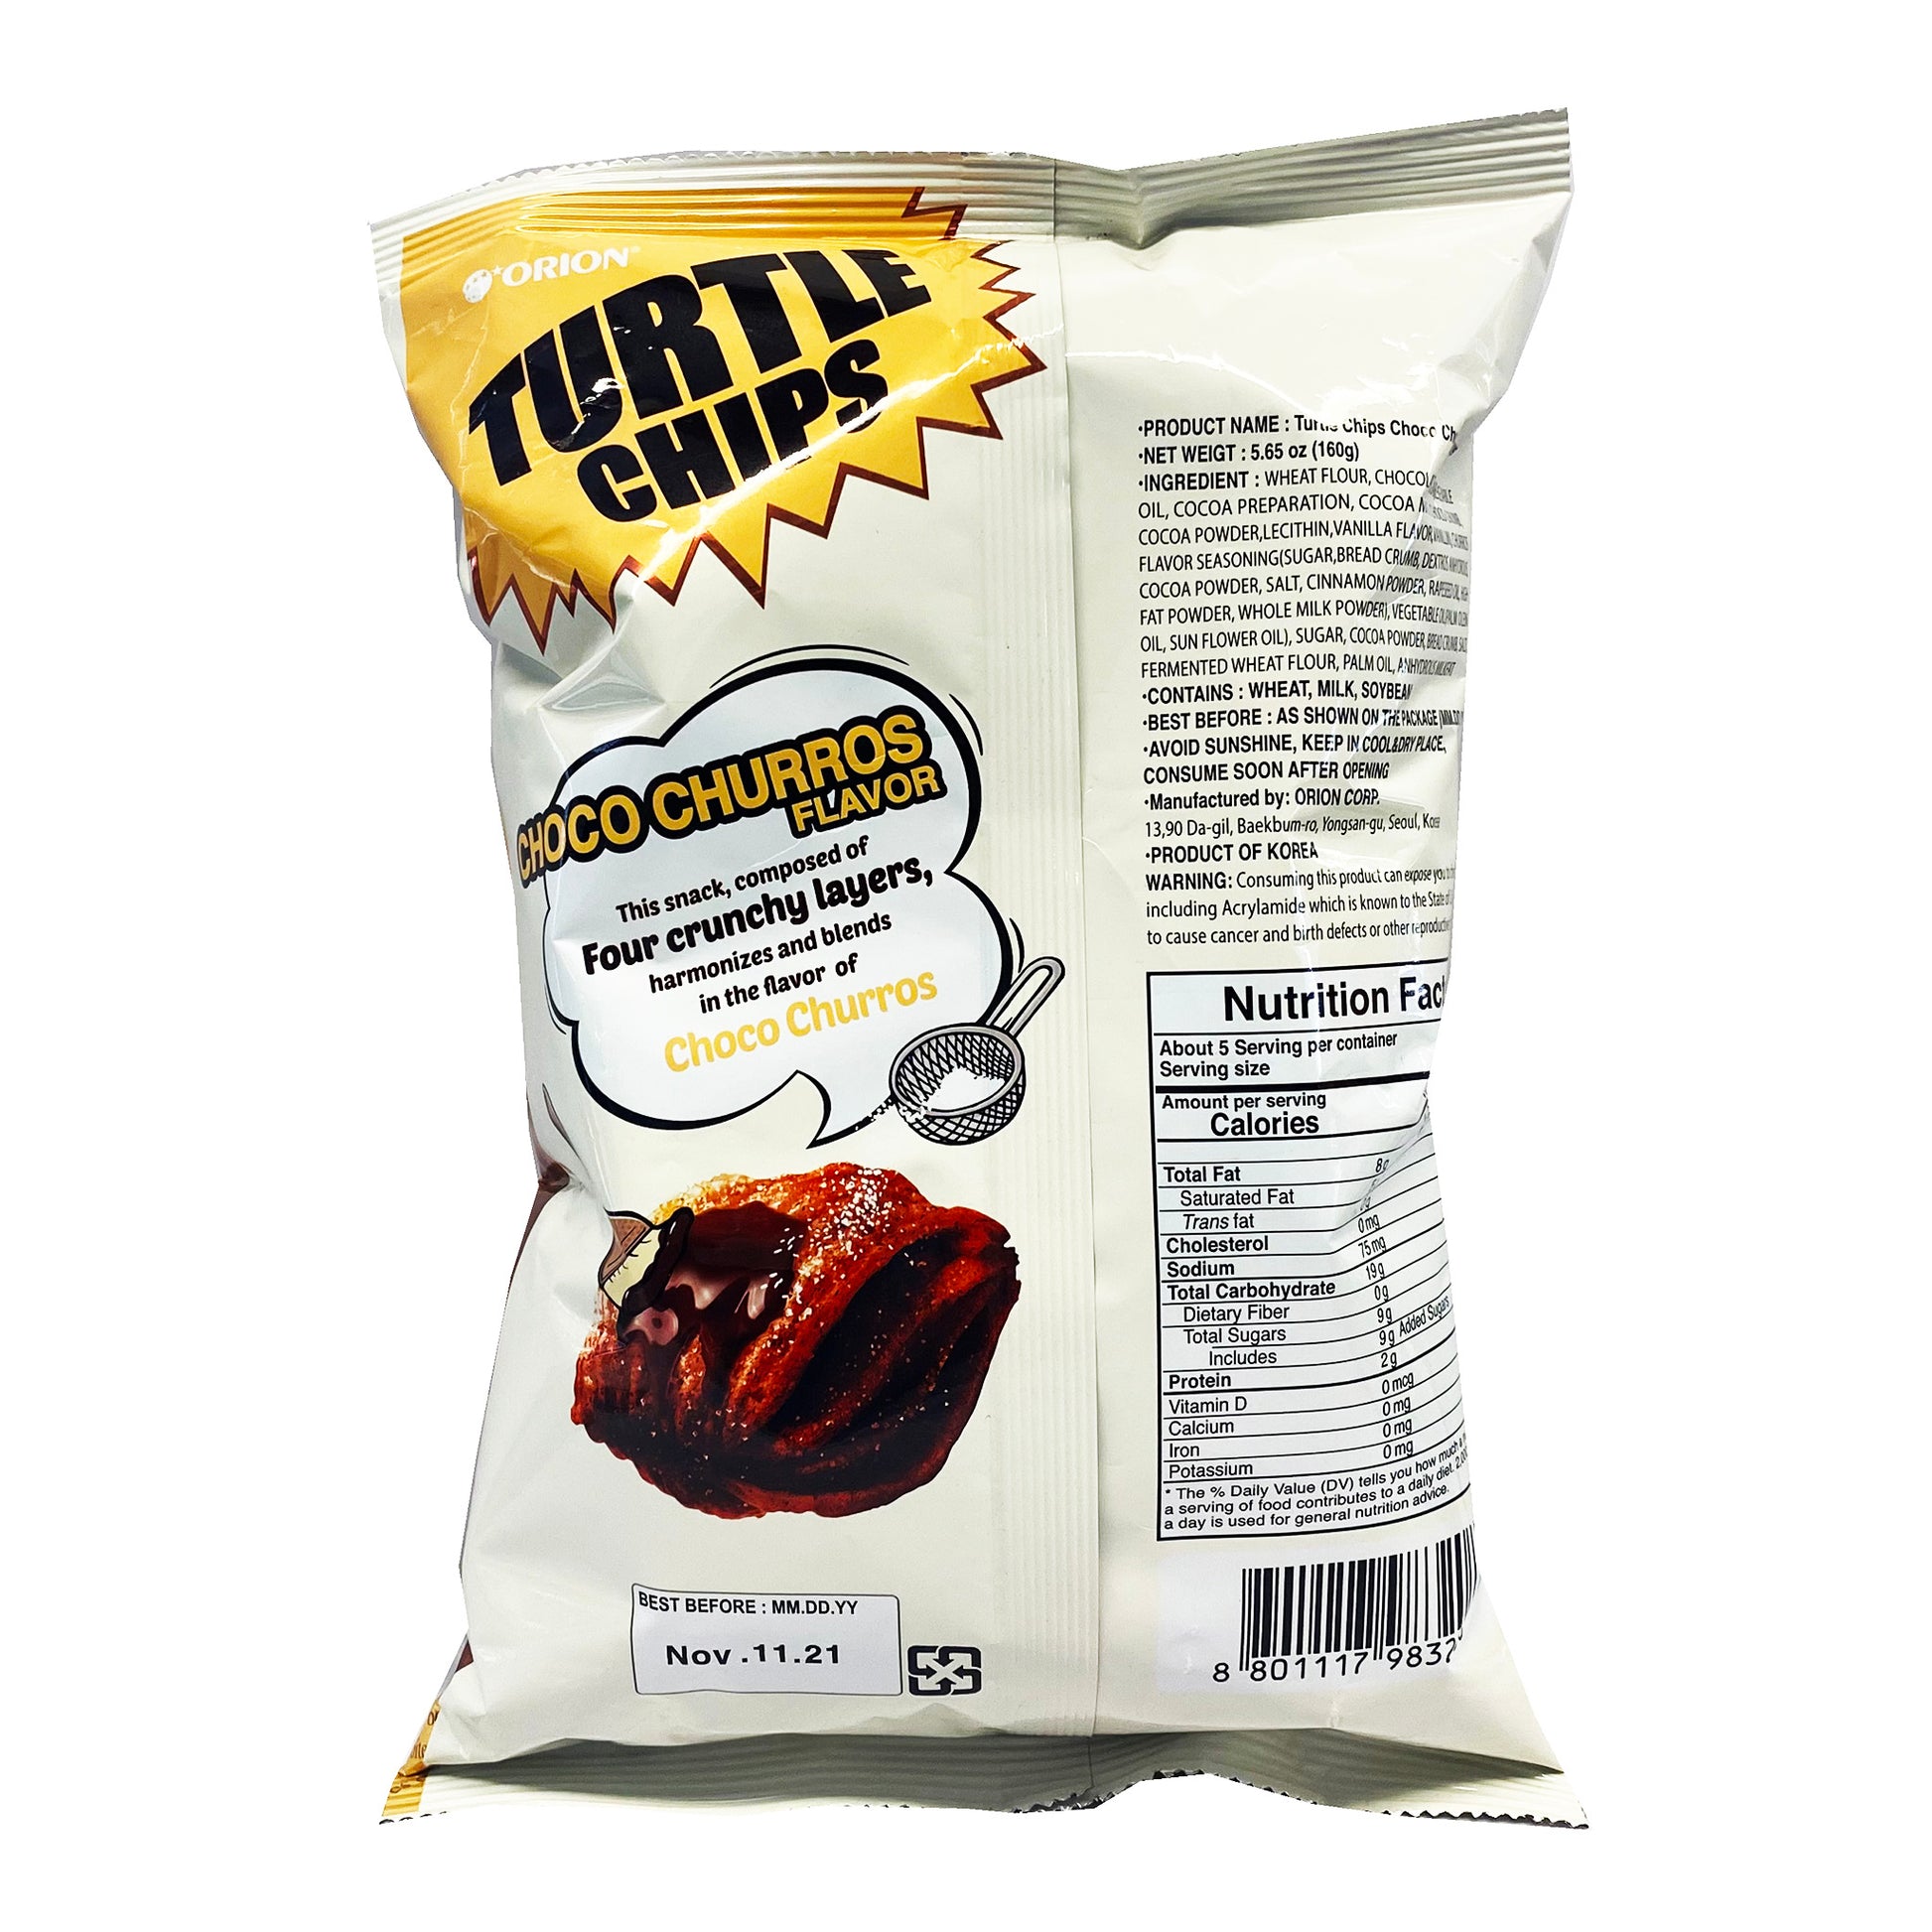 Back graphic image of Orion Turtle Chips - Choco Churros Flavor 5.65oz